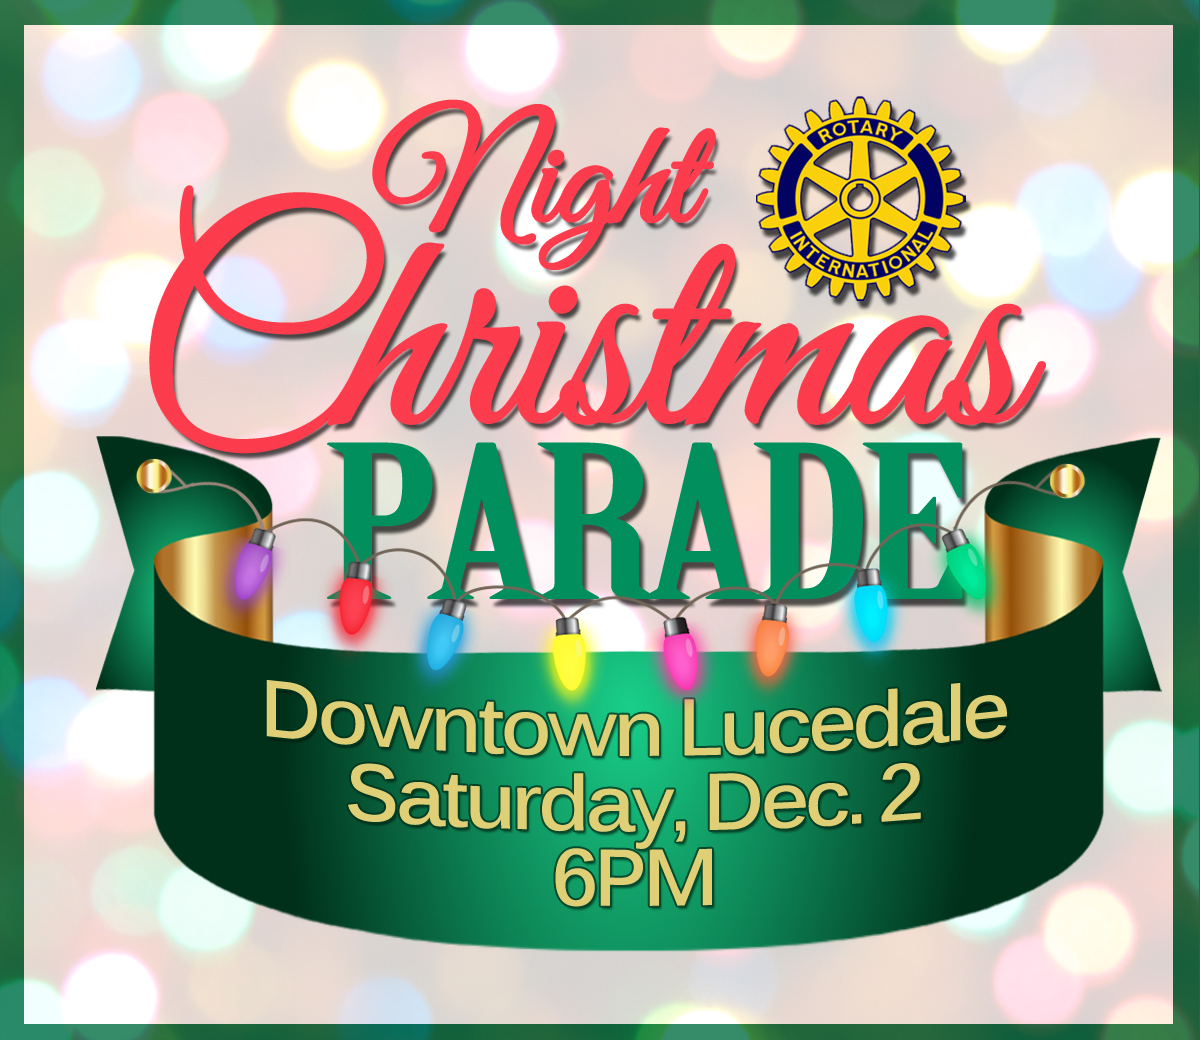 Lucedale Christmas Parade is set for Dec. 2